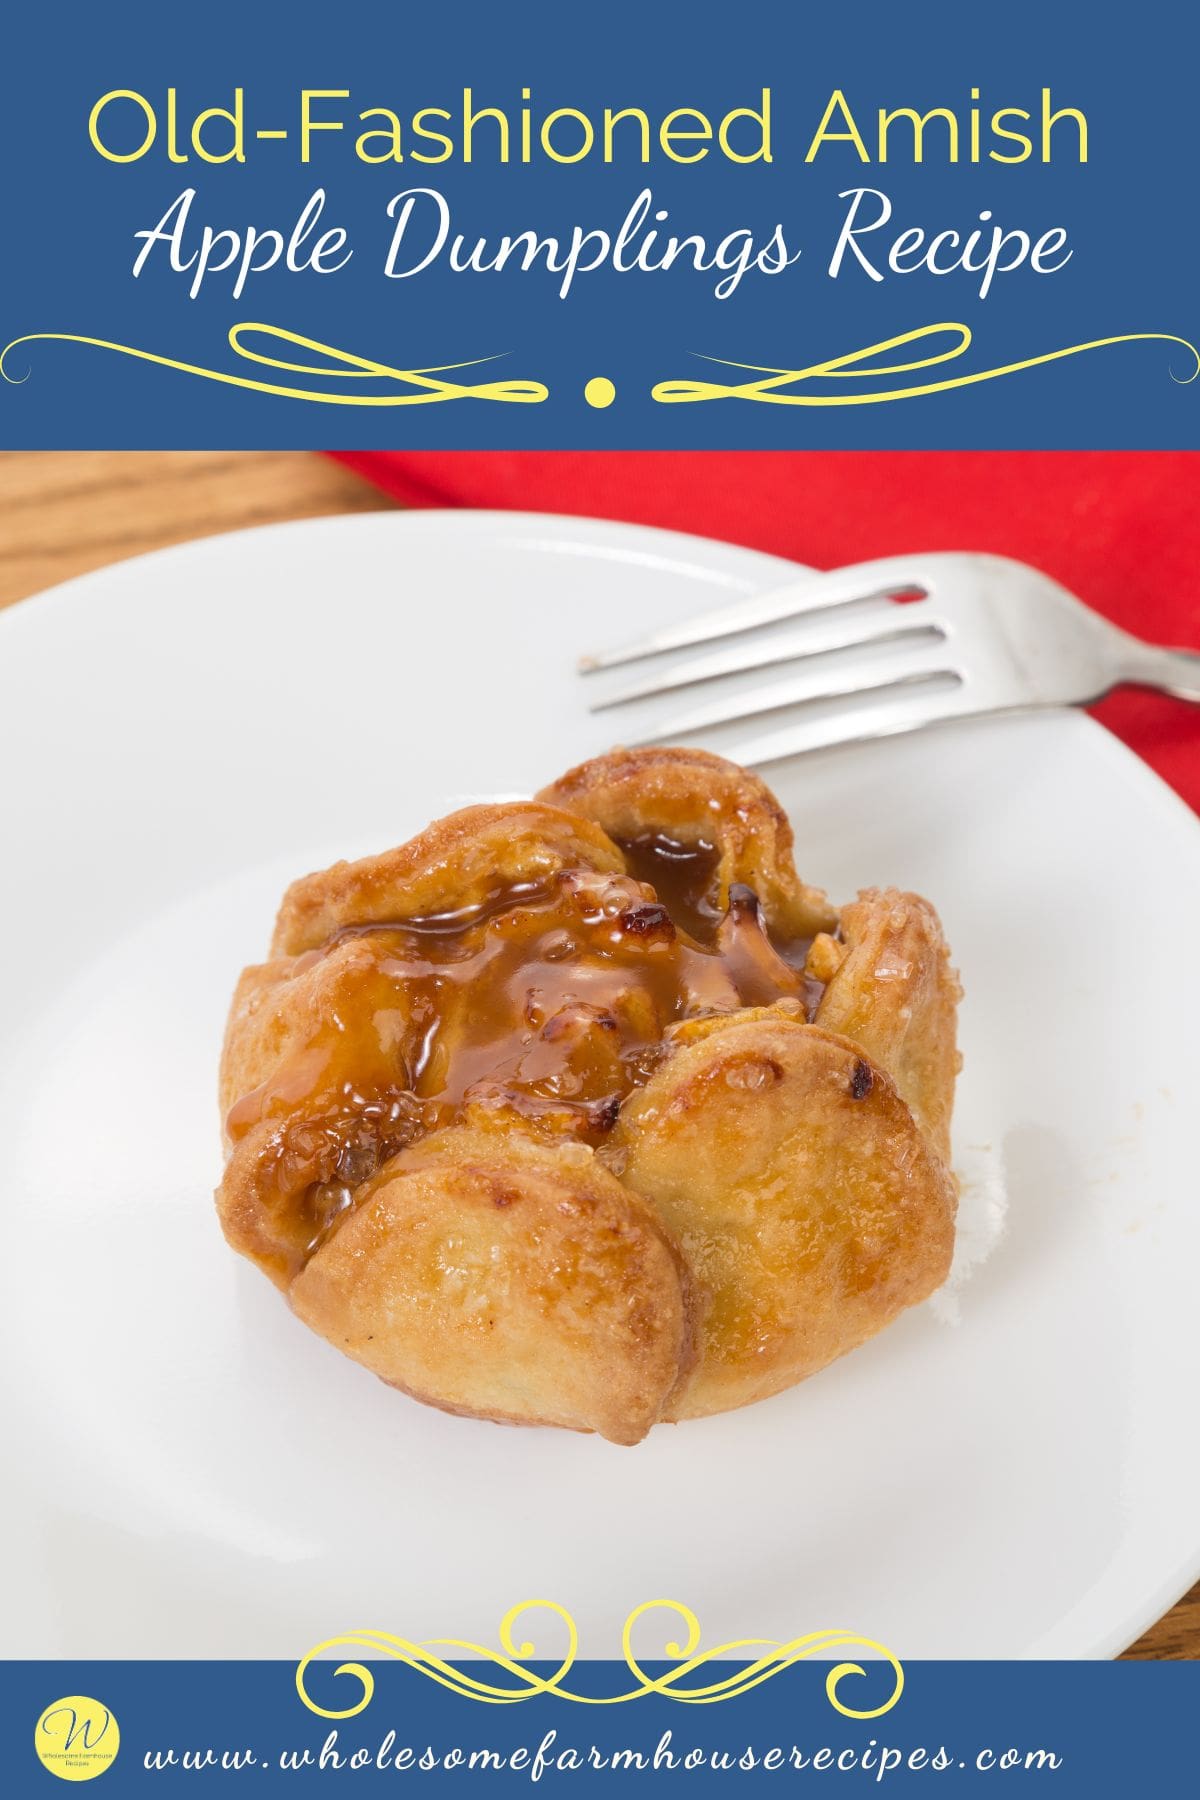 Today we are sharing a recipe that's been a beloved classic in many Amish households: Old-Fashioned Amish Apple Dumplings. These delightful treats are the perfect combination of tender apples, flaky pastry, and a sweet, cinnamon-spiced sauce. Whether you're serving them for a special occasion or simply as a cozy dessert on a chilly evening, these apple dumplings are sure to impress.